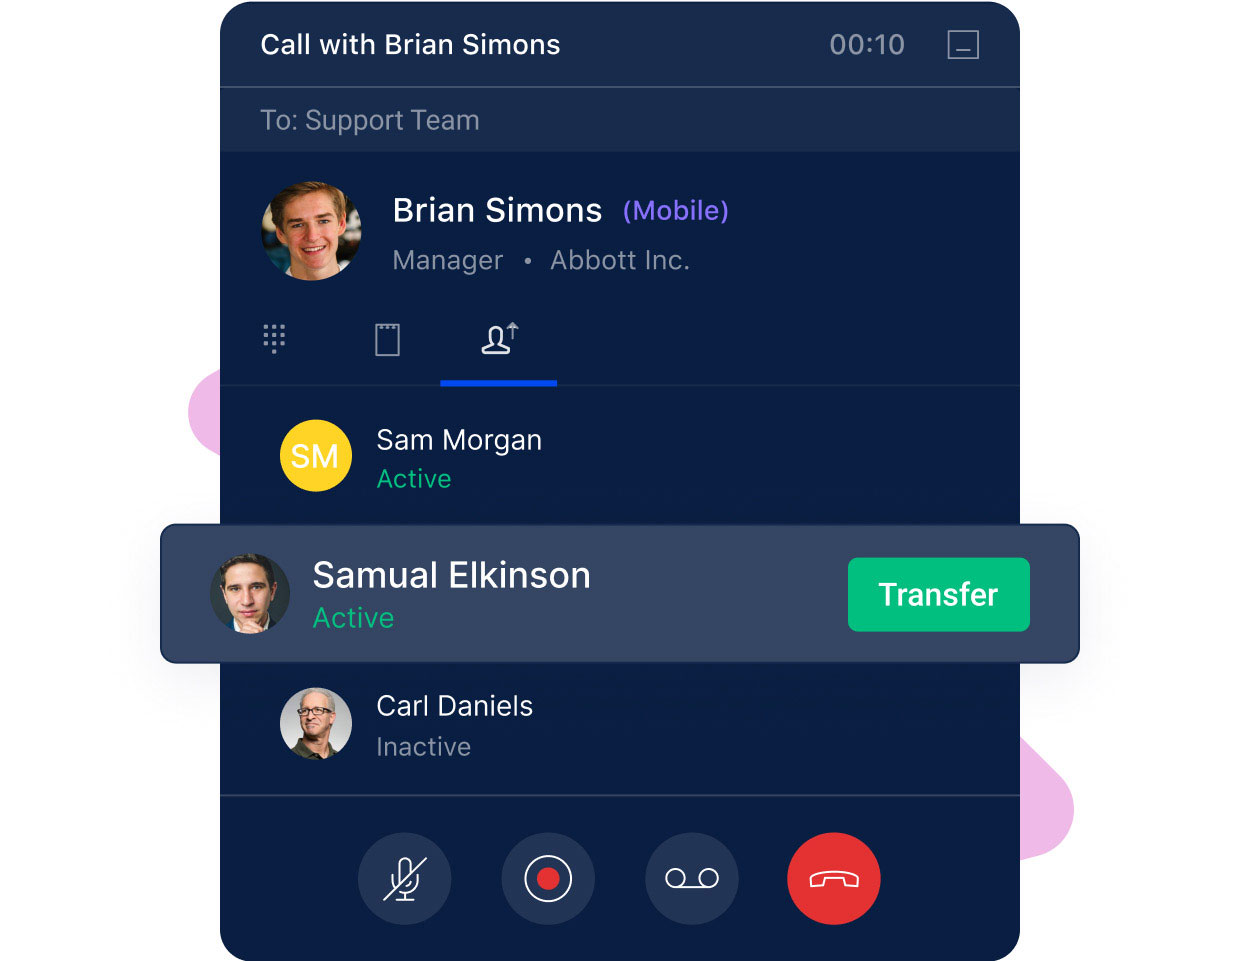 Collaborate easily with your team using call transfer